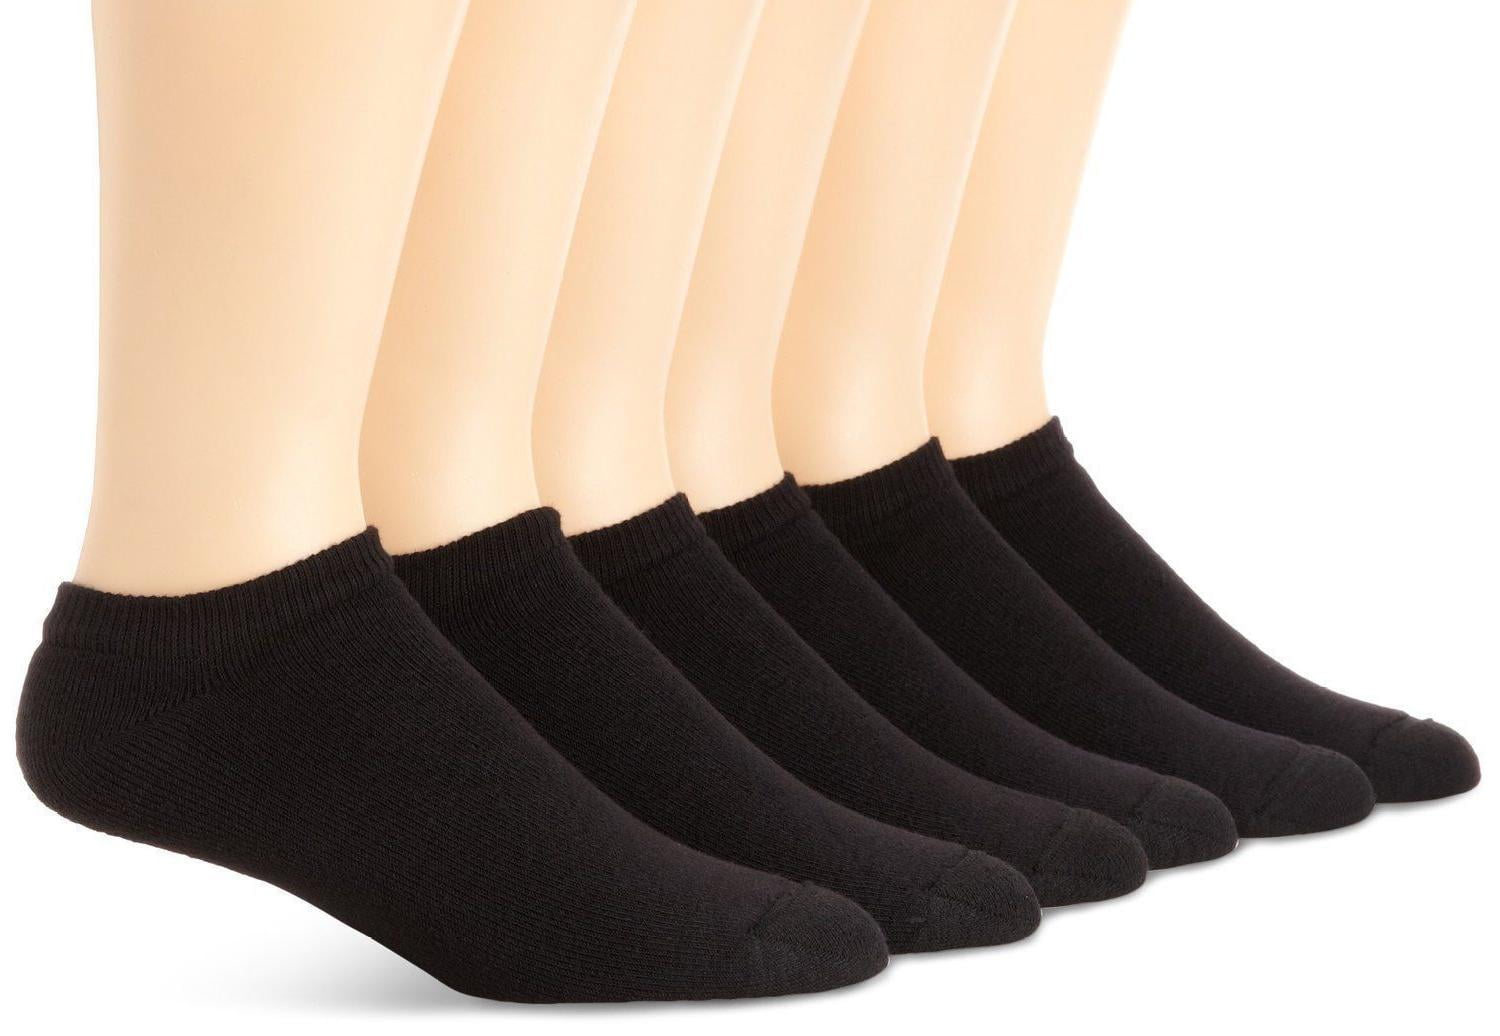 12 PAIRS LADIES SOCKS FOOTSIES TRAINER INVISIBLE SHOW SHOE LINER FOOT LINER BOOT 